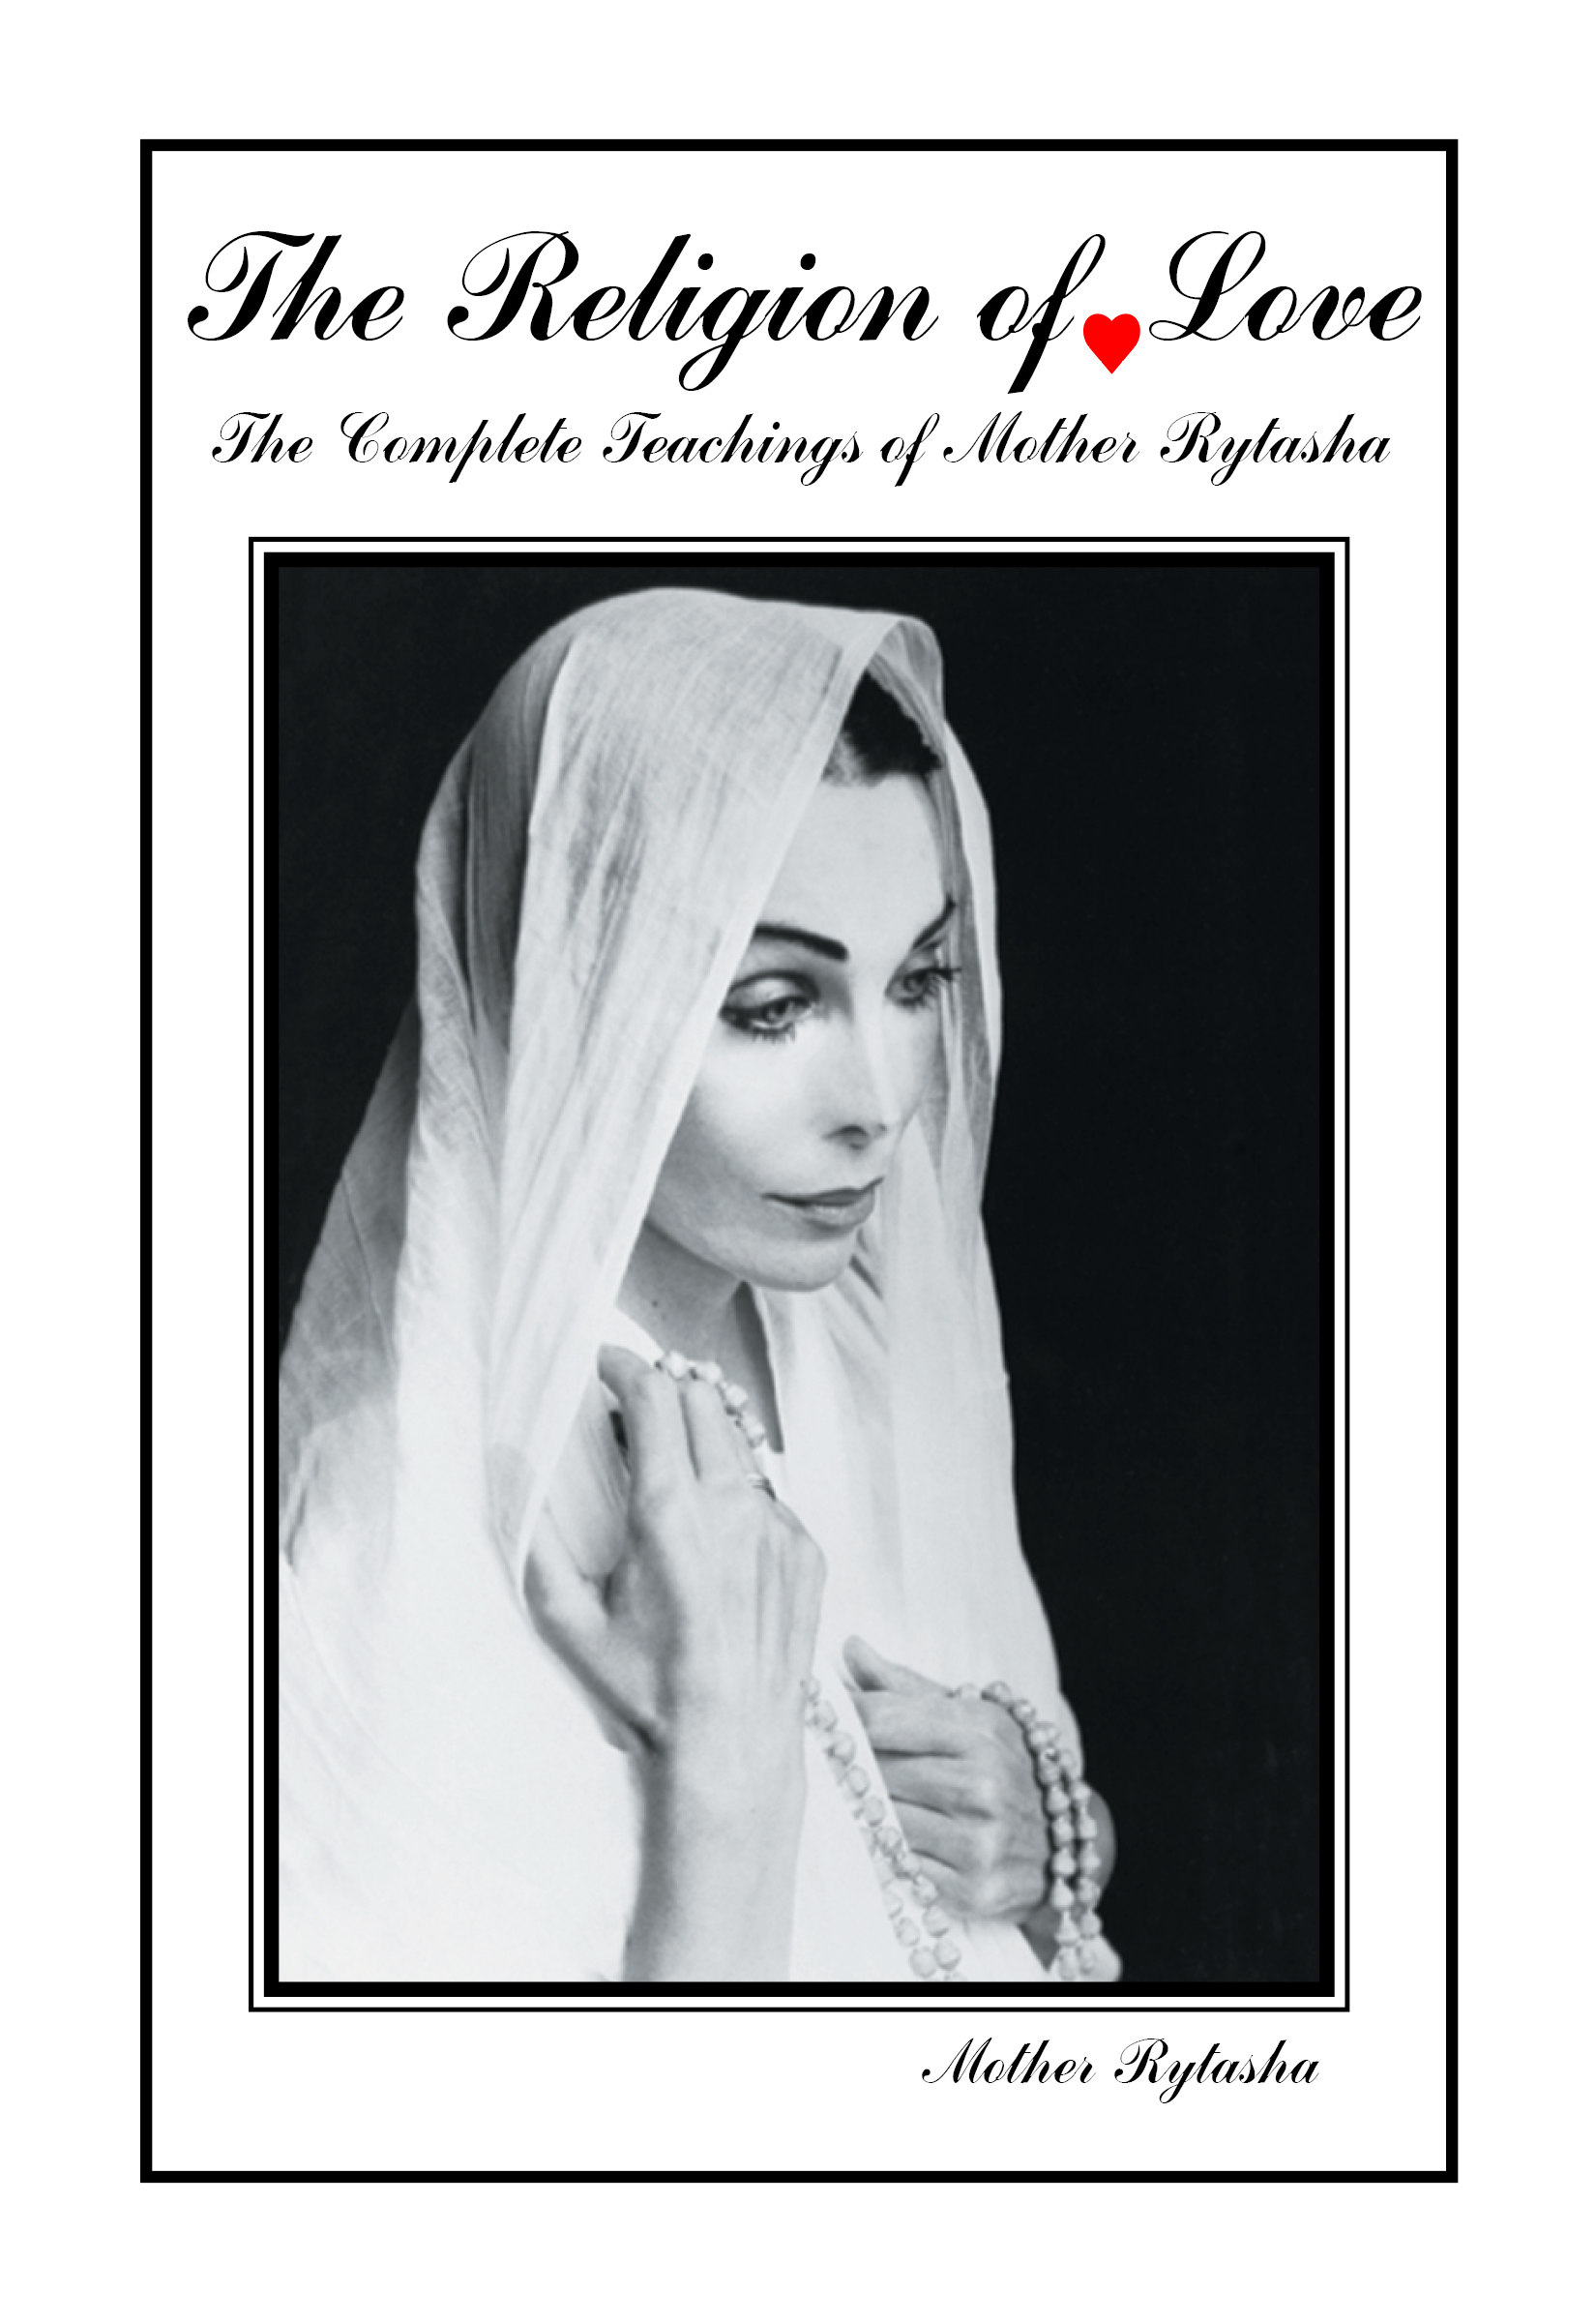 The Religion of Love: The Complete Teachings of Mother Rytasha